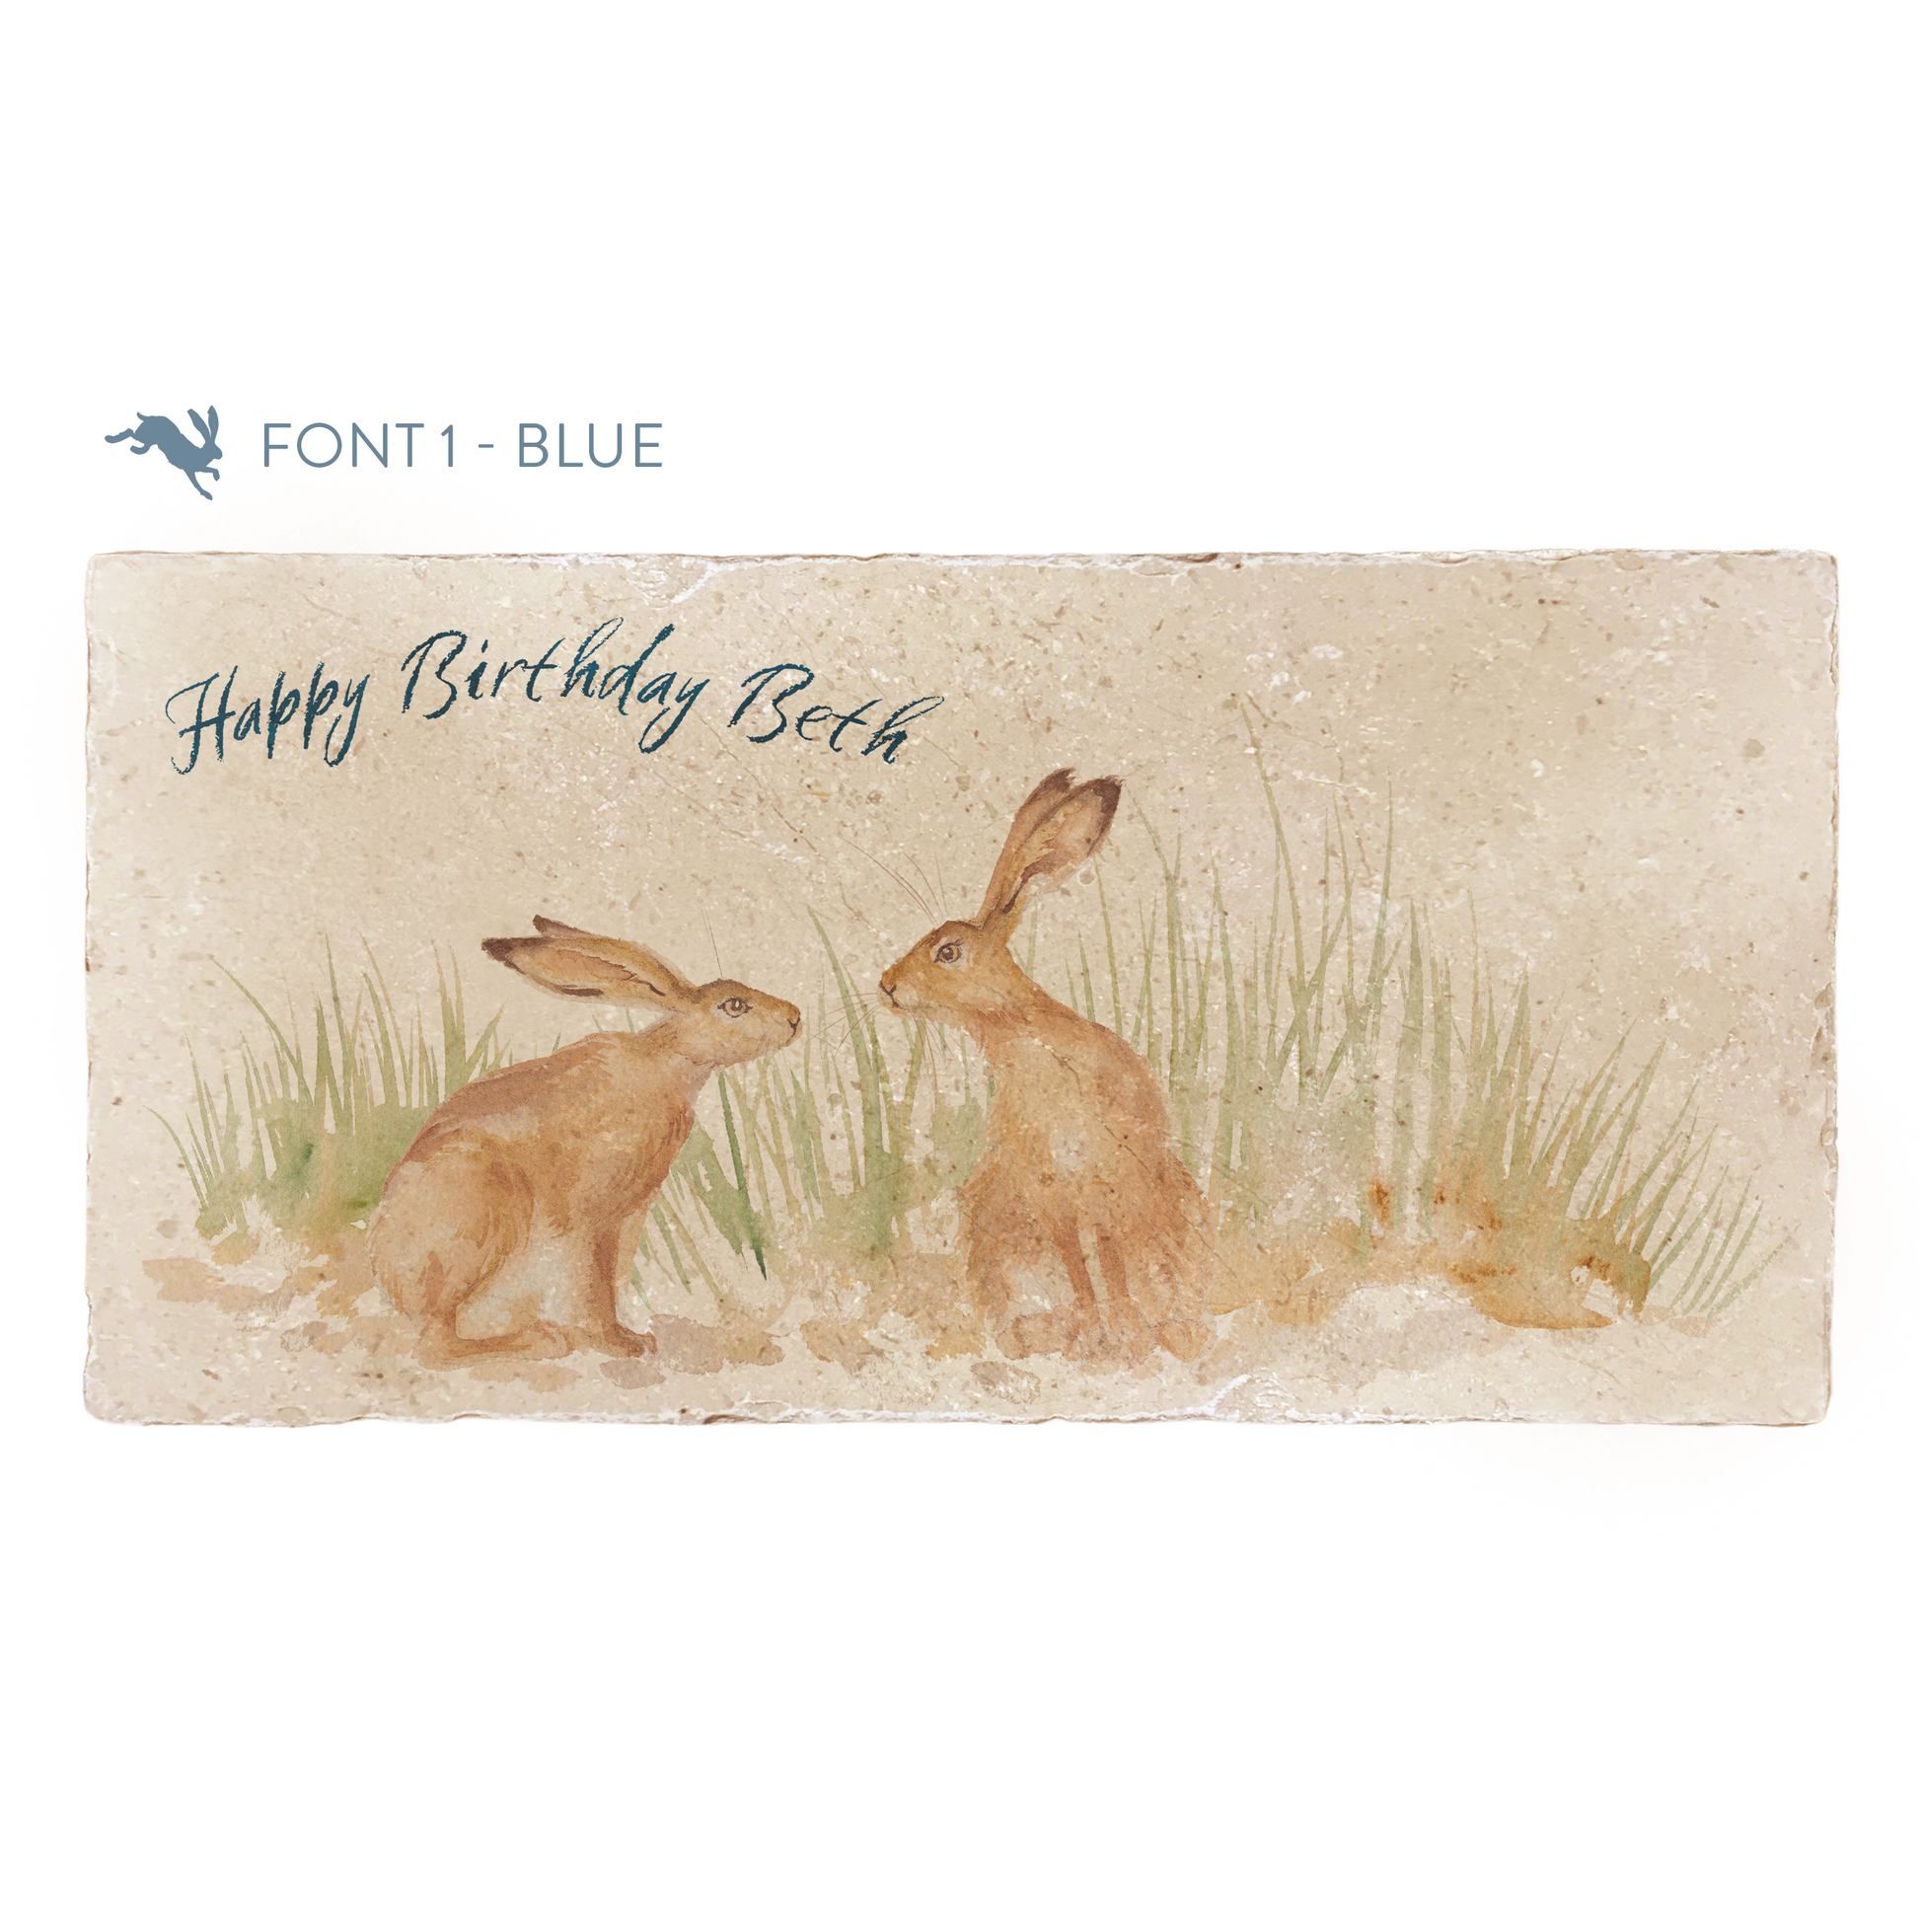 A personalised rectangular marble sharing platter featuring two kissing hares in a watercolour style. The example personalised dark blue text reads ‘Happy Birthday Beth’ in a brush script font.